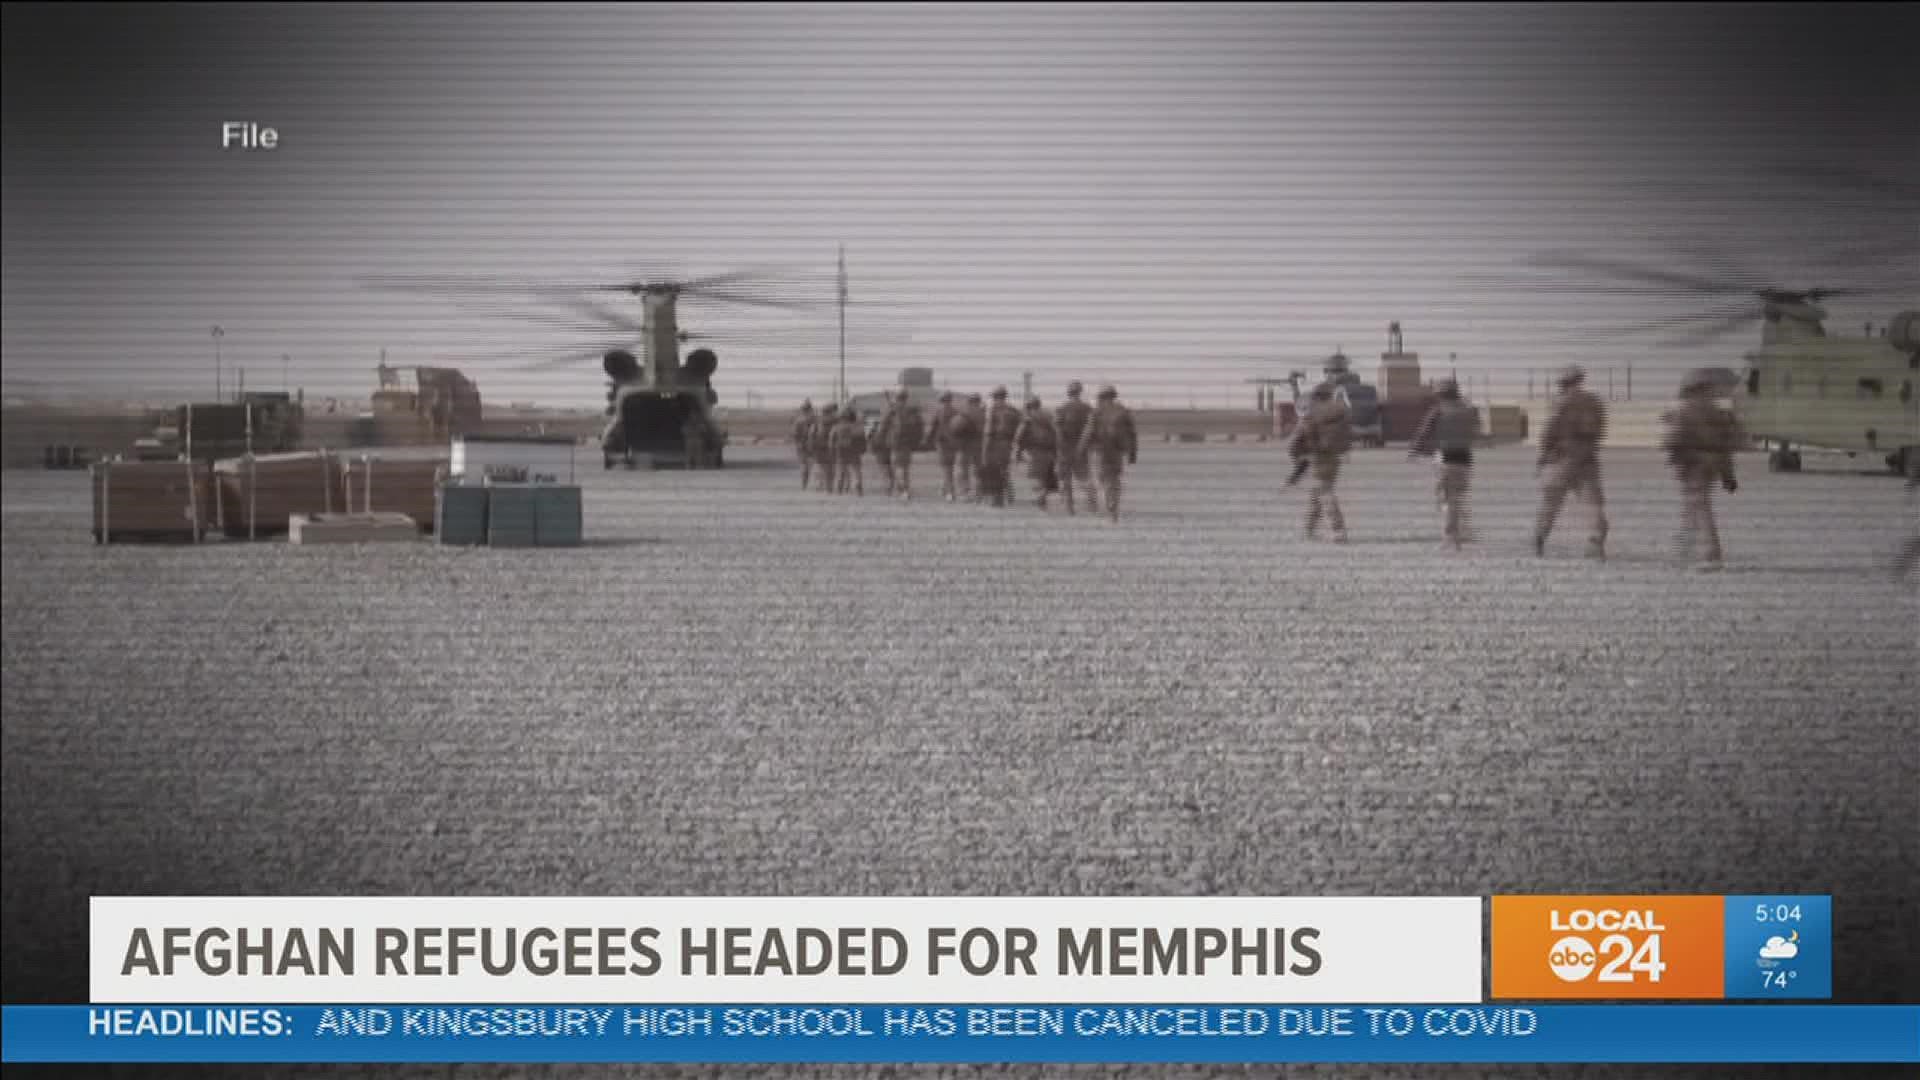 Refugee Memphis said Afghan refugees that served as U.S. Military translators will be coming to Memphis for safety.